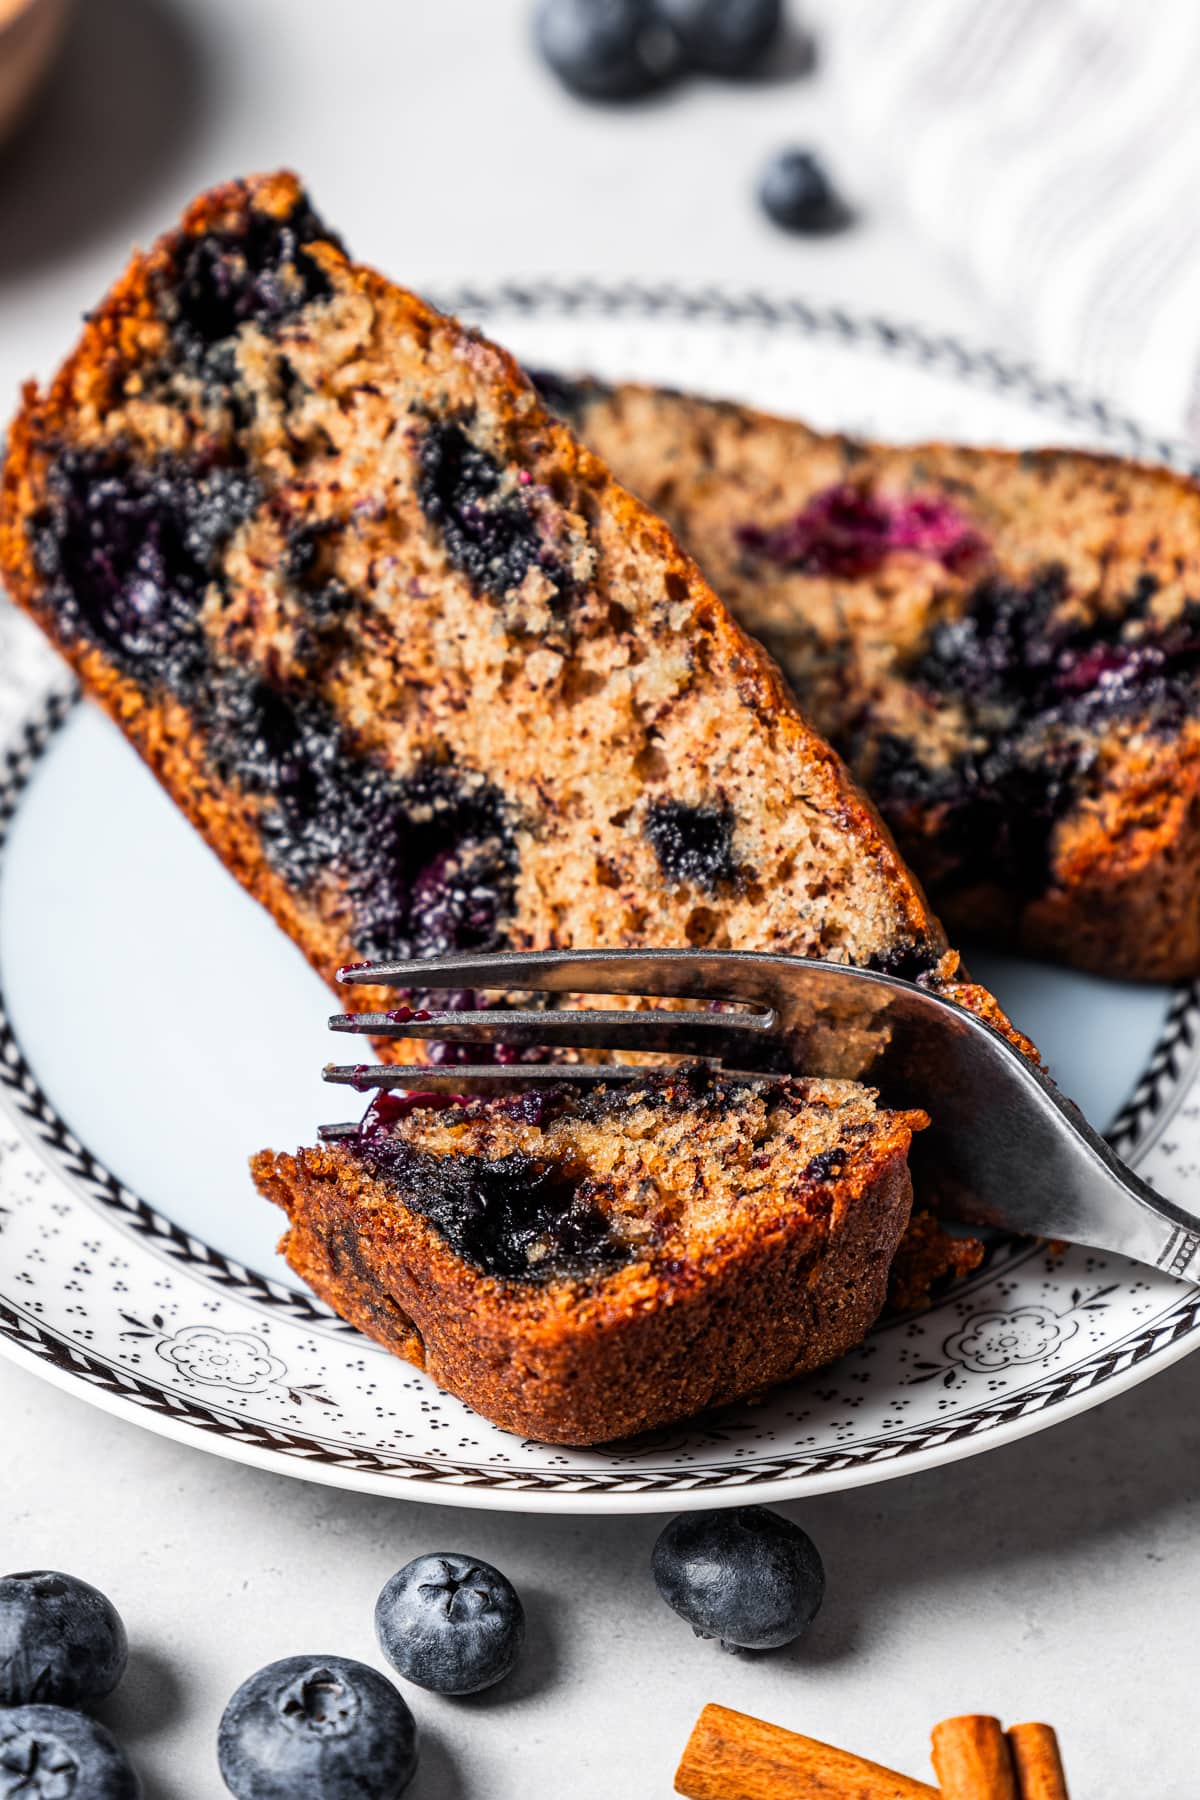 A fork cutting into a slice of blueberry banana bread on a plate.